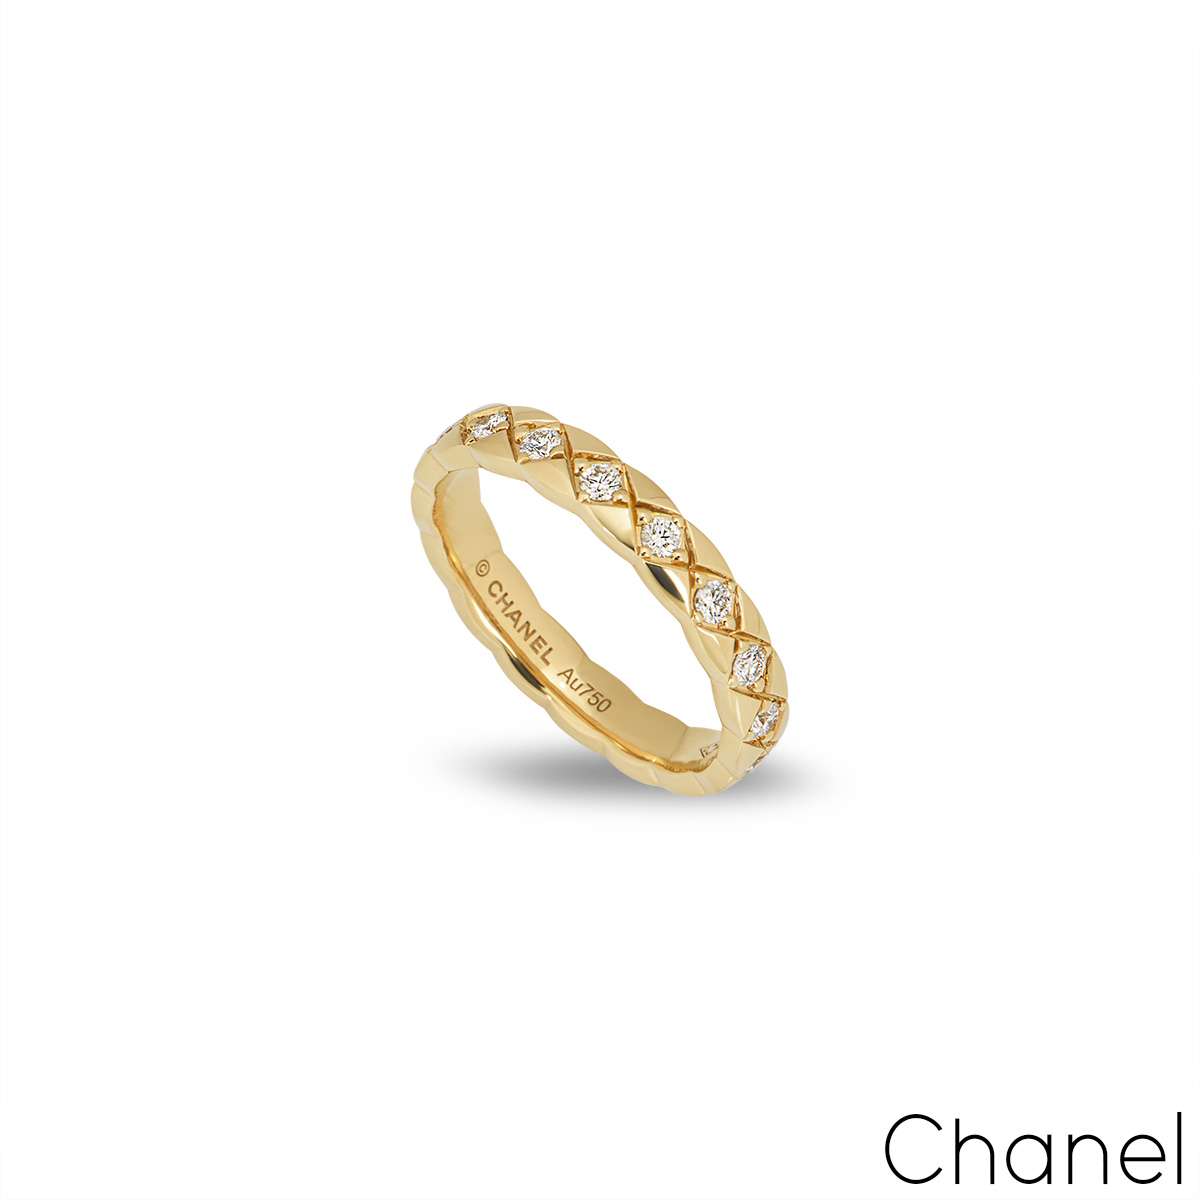 champagne and chanel ring size